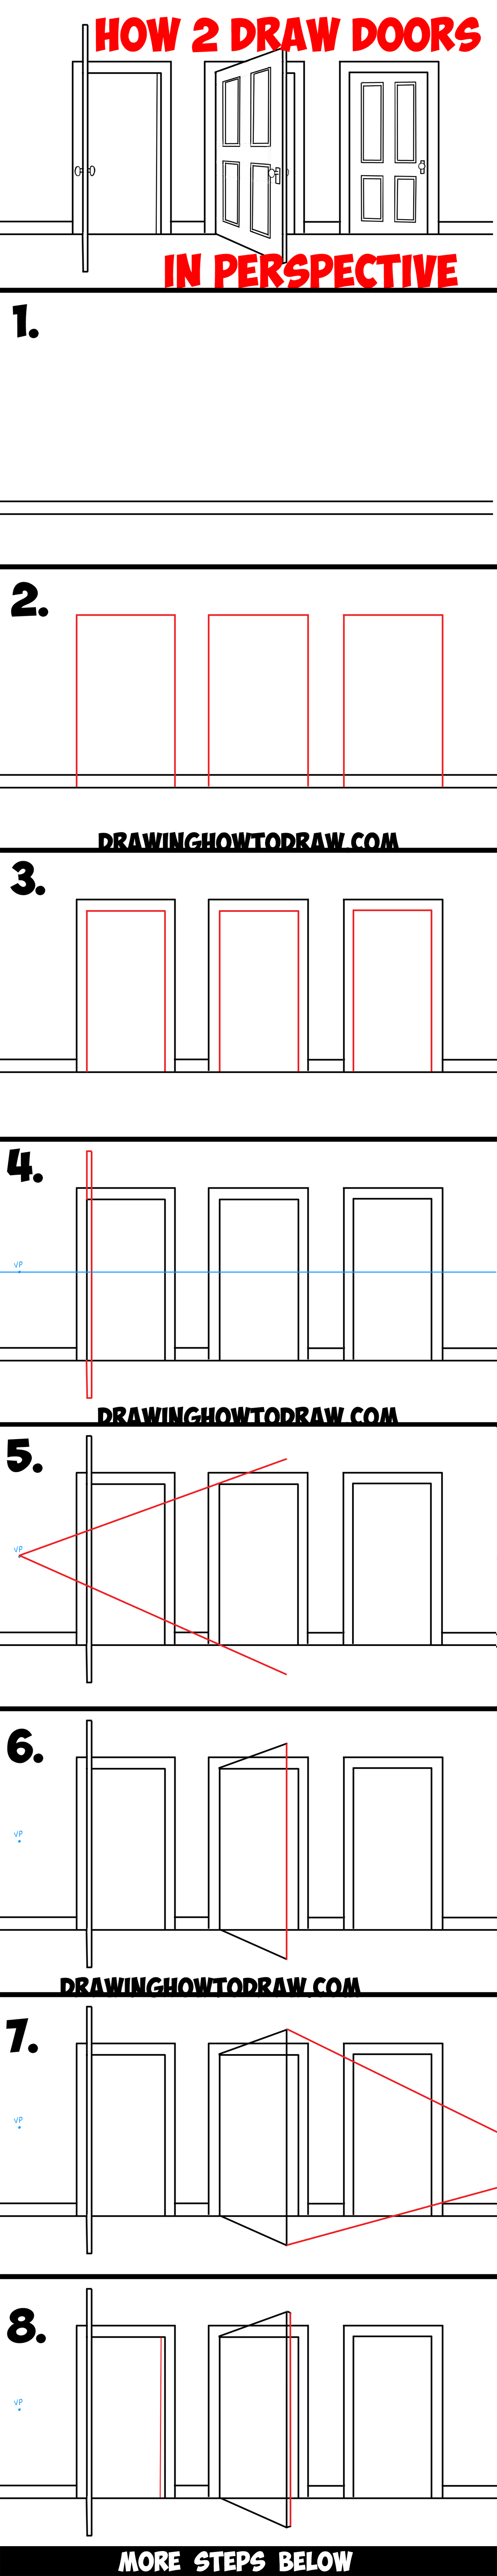 How to Draw Doors (Opened / Closed) in Two Point Perspective Easy